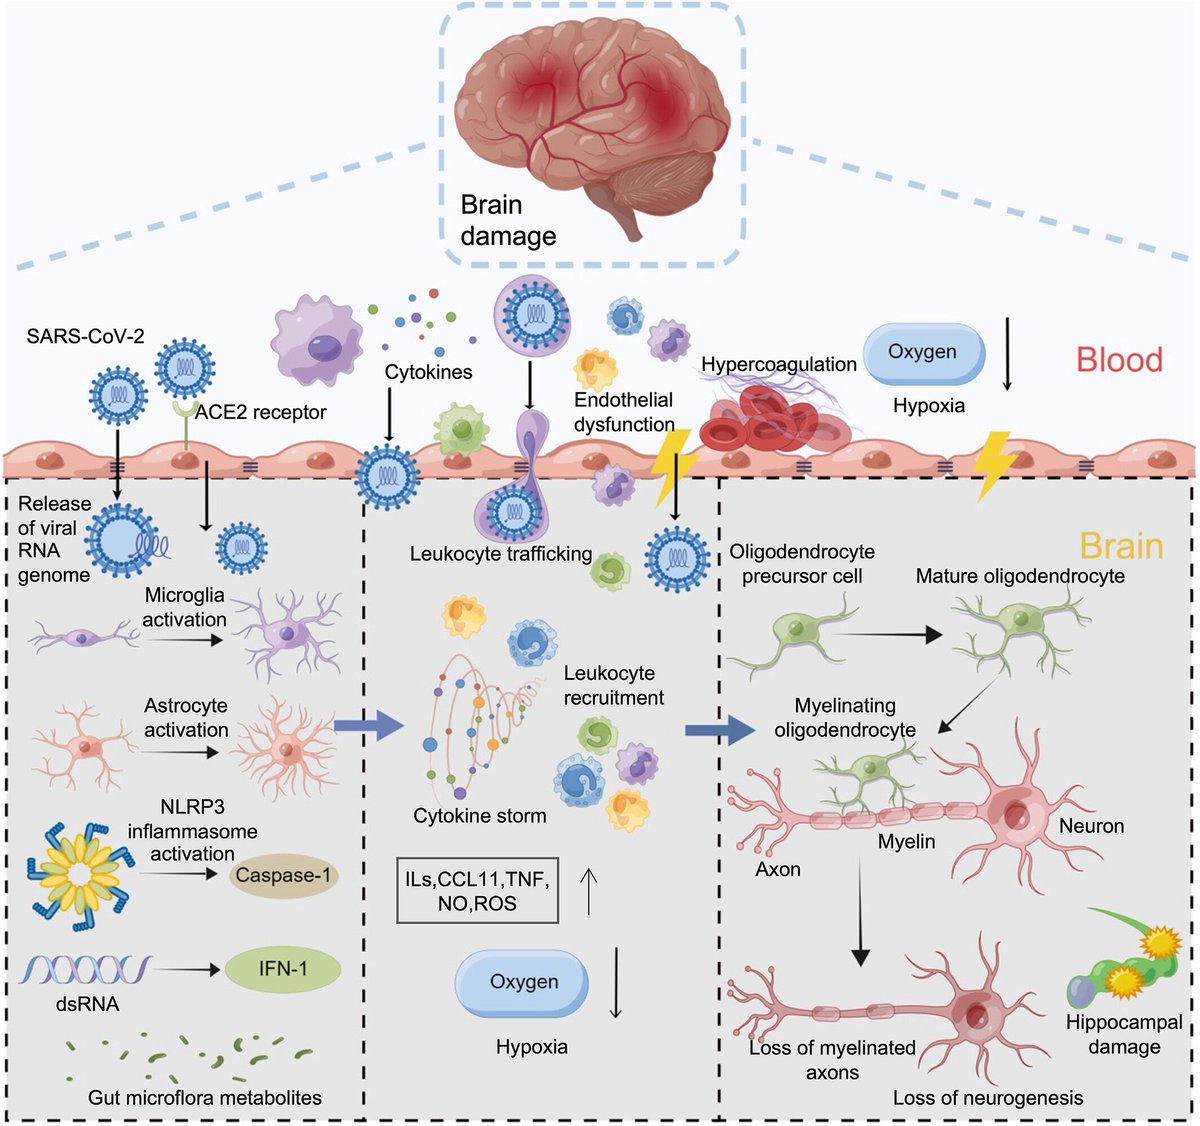 4) Proposed mechanisms for CI include direct viral toxicity, hypoxia, hypercoagulability, immune responses involving microglia/astrocyte activation and peripheral immune cell infiltration, BBB dysfunction, and cytokine dysregulation